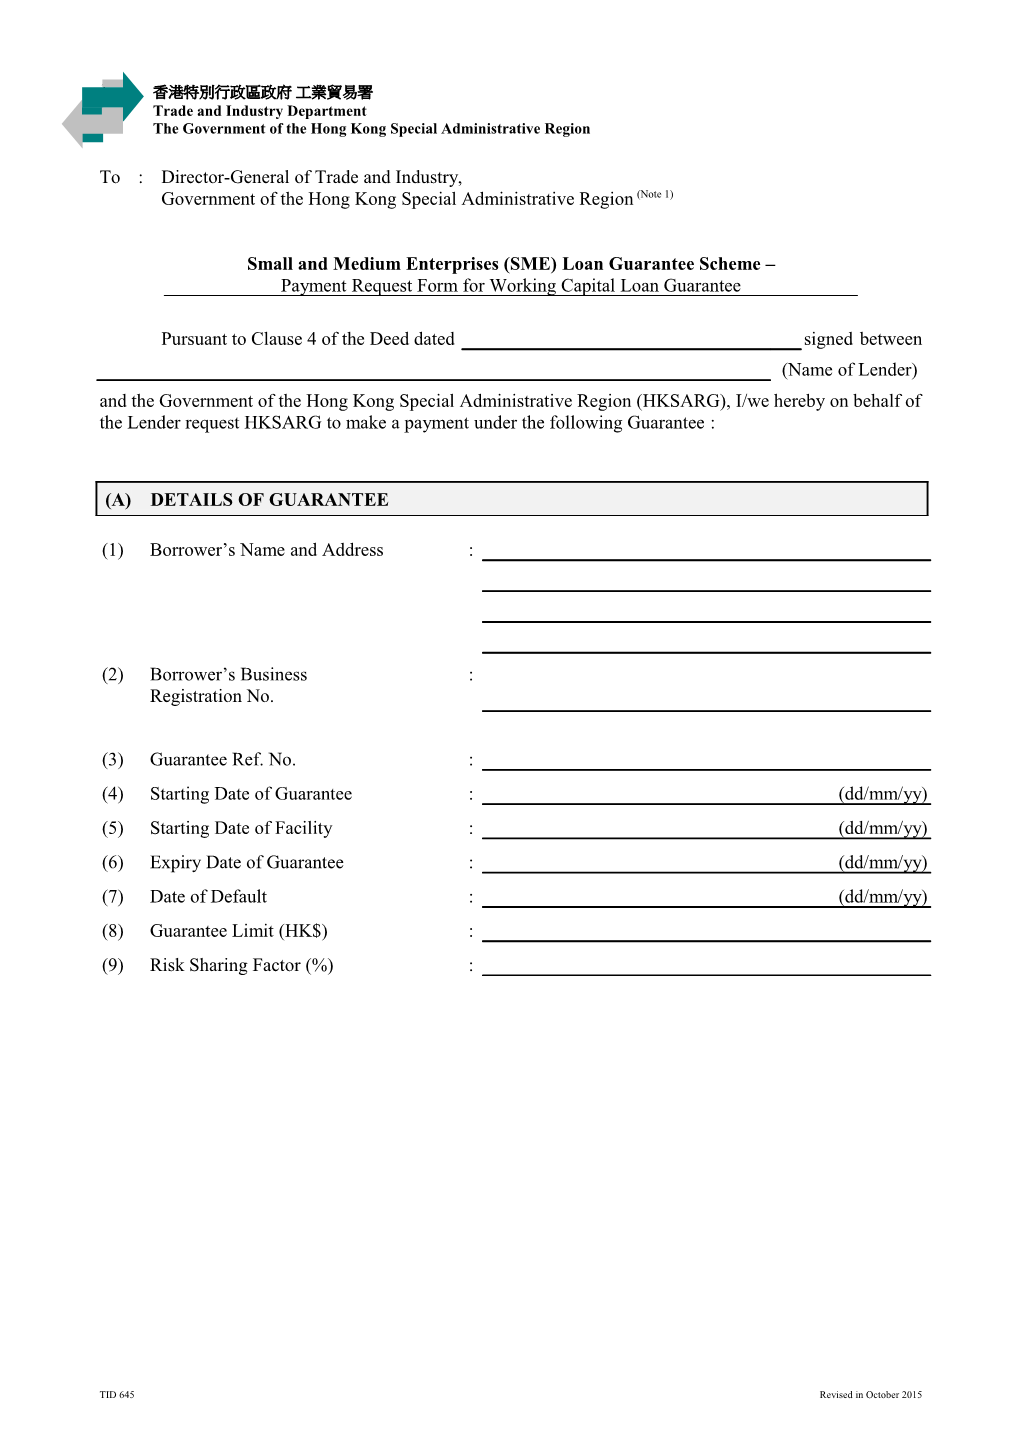 Payment Request Form for Working Capital Loan Guarantee